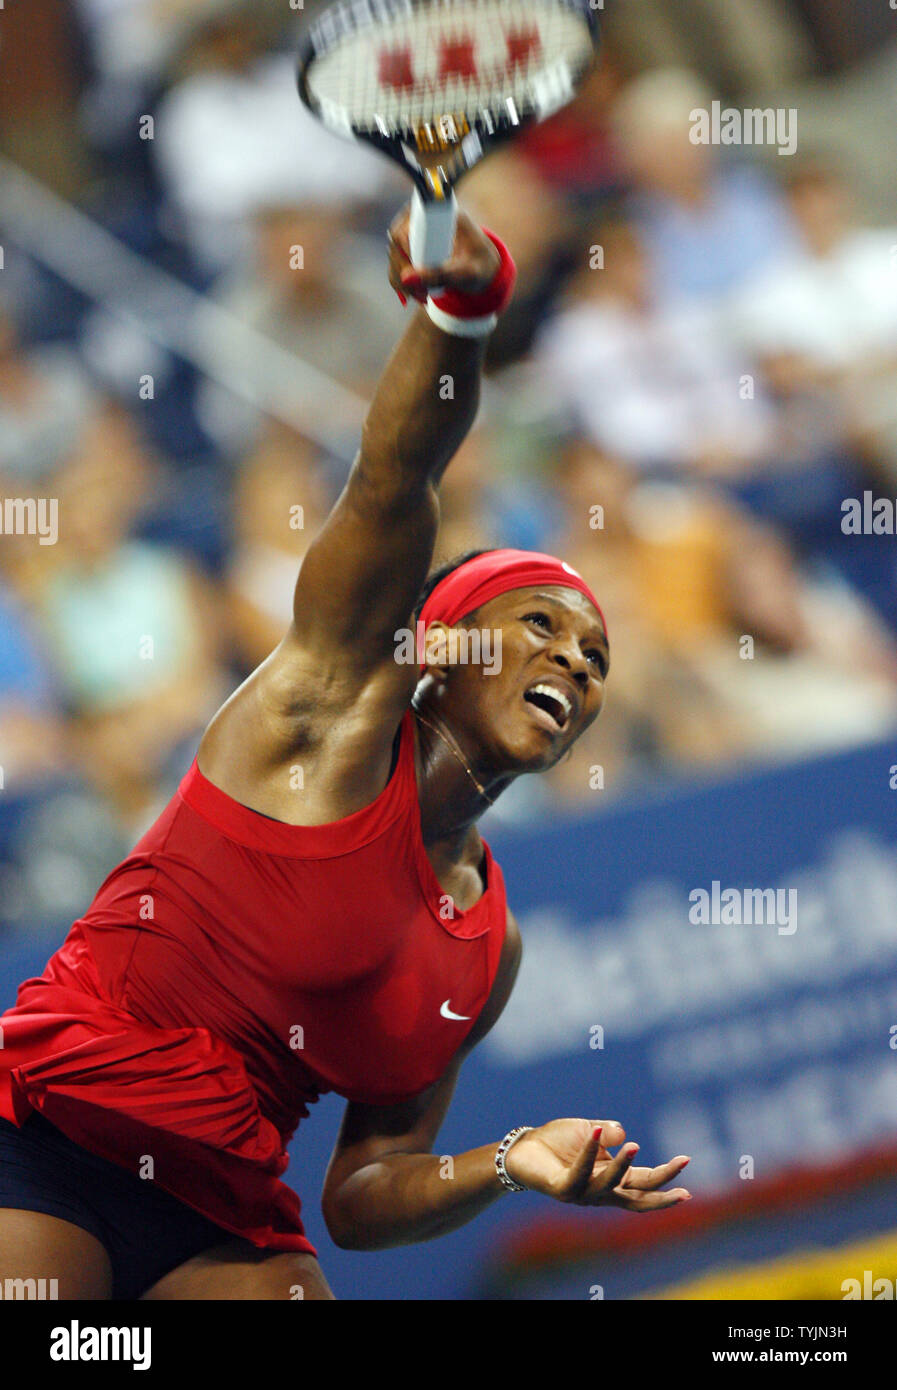 Serena Williams serves in her match against Severine Bremond on day eight at the U.S. Open Tennis Championships at the U.S. National Tennis Center in Flushing Meadows, New York on September 1, 2008. Williams defeated Bremond 6-2 6-2.      (UPI Photo/John Angelillo) Stock Photo